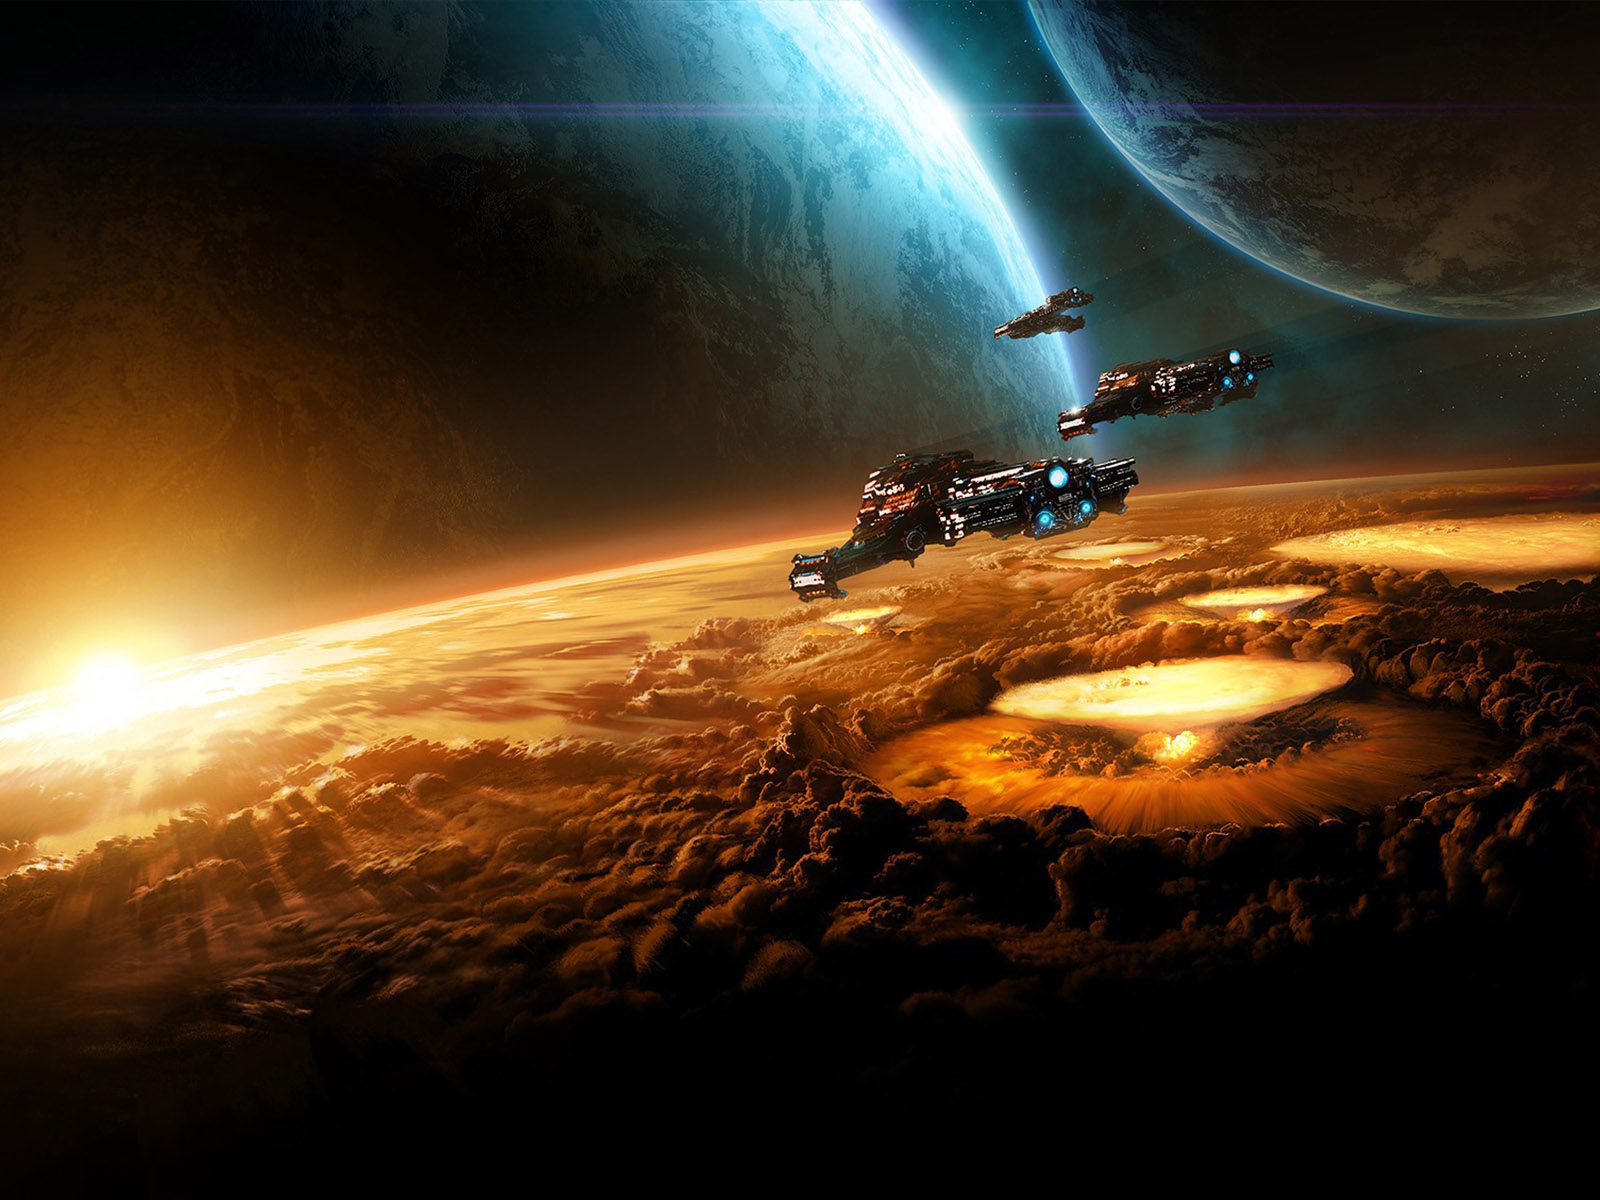 See The Sights A New Fantasy World Using Sci Fi Wallpapereize Design